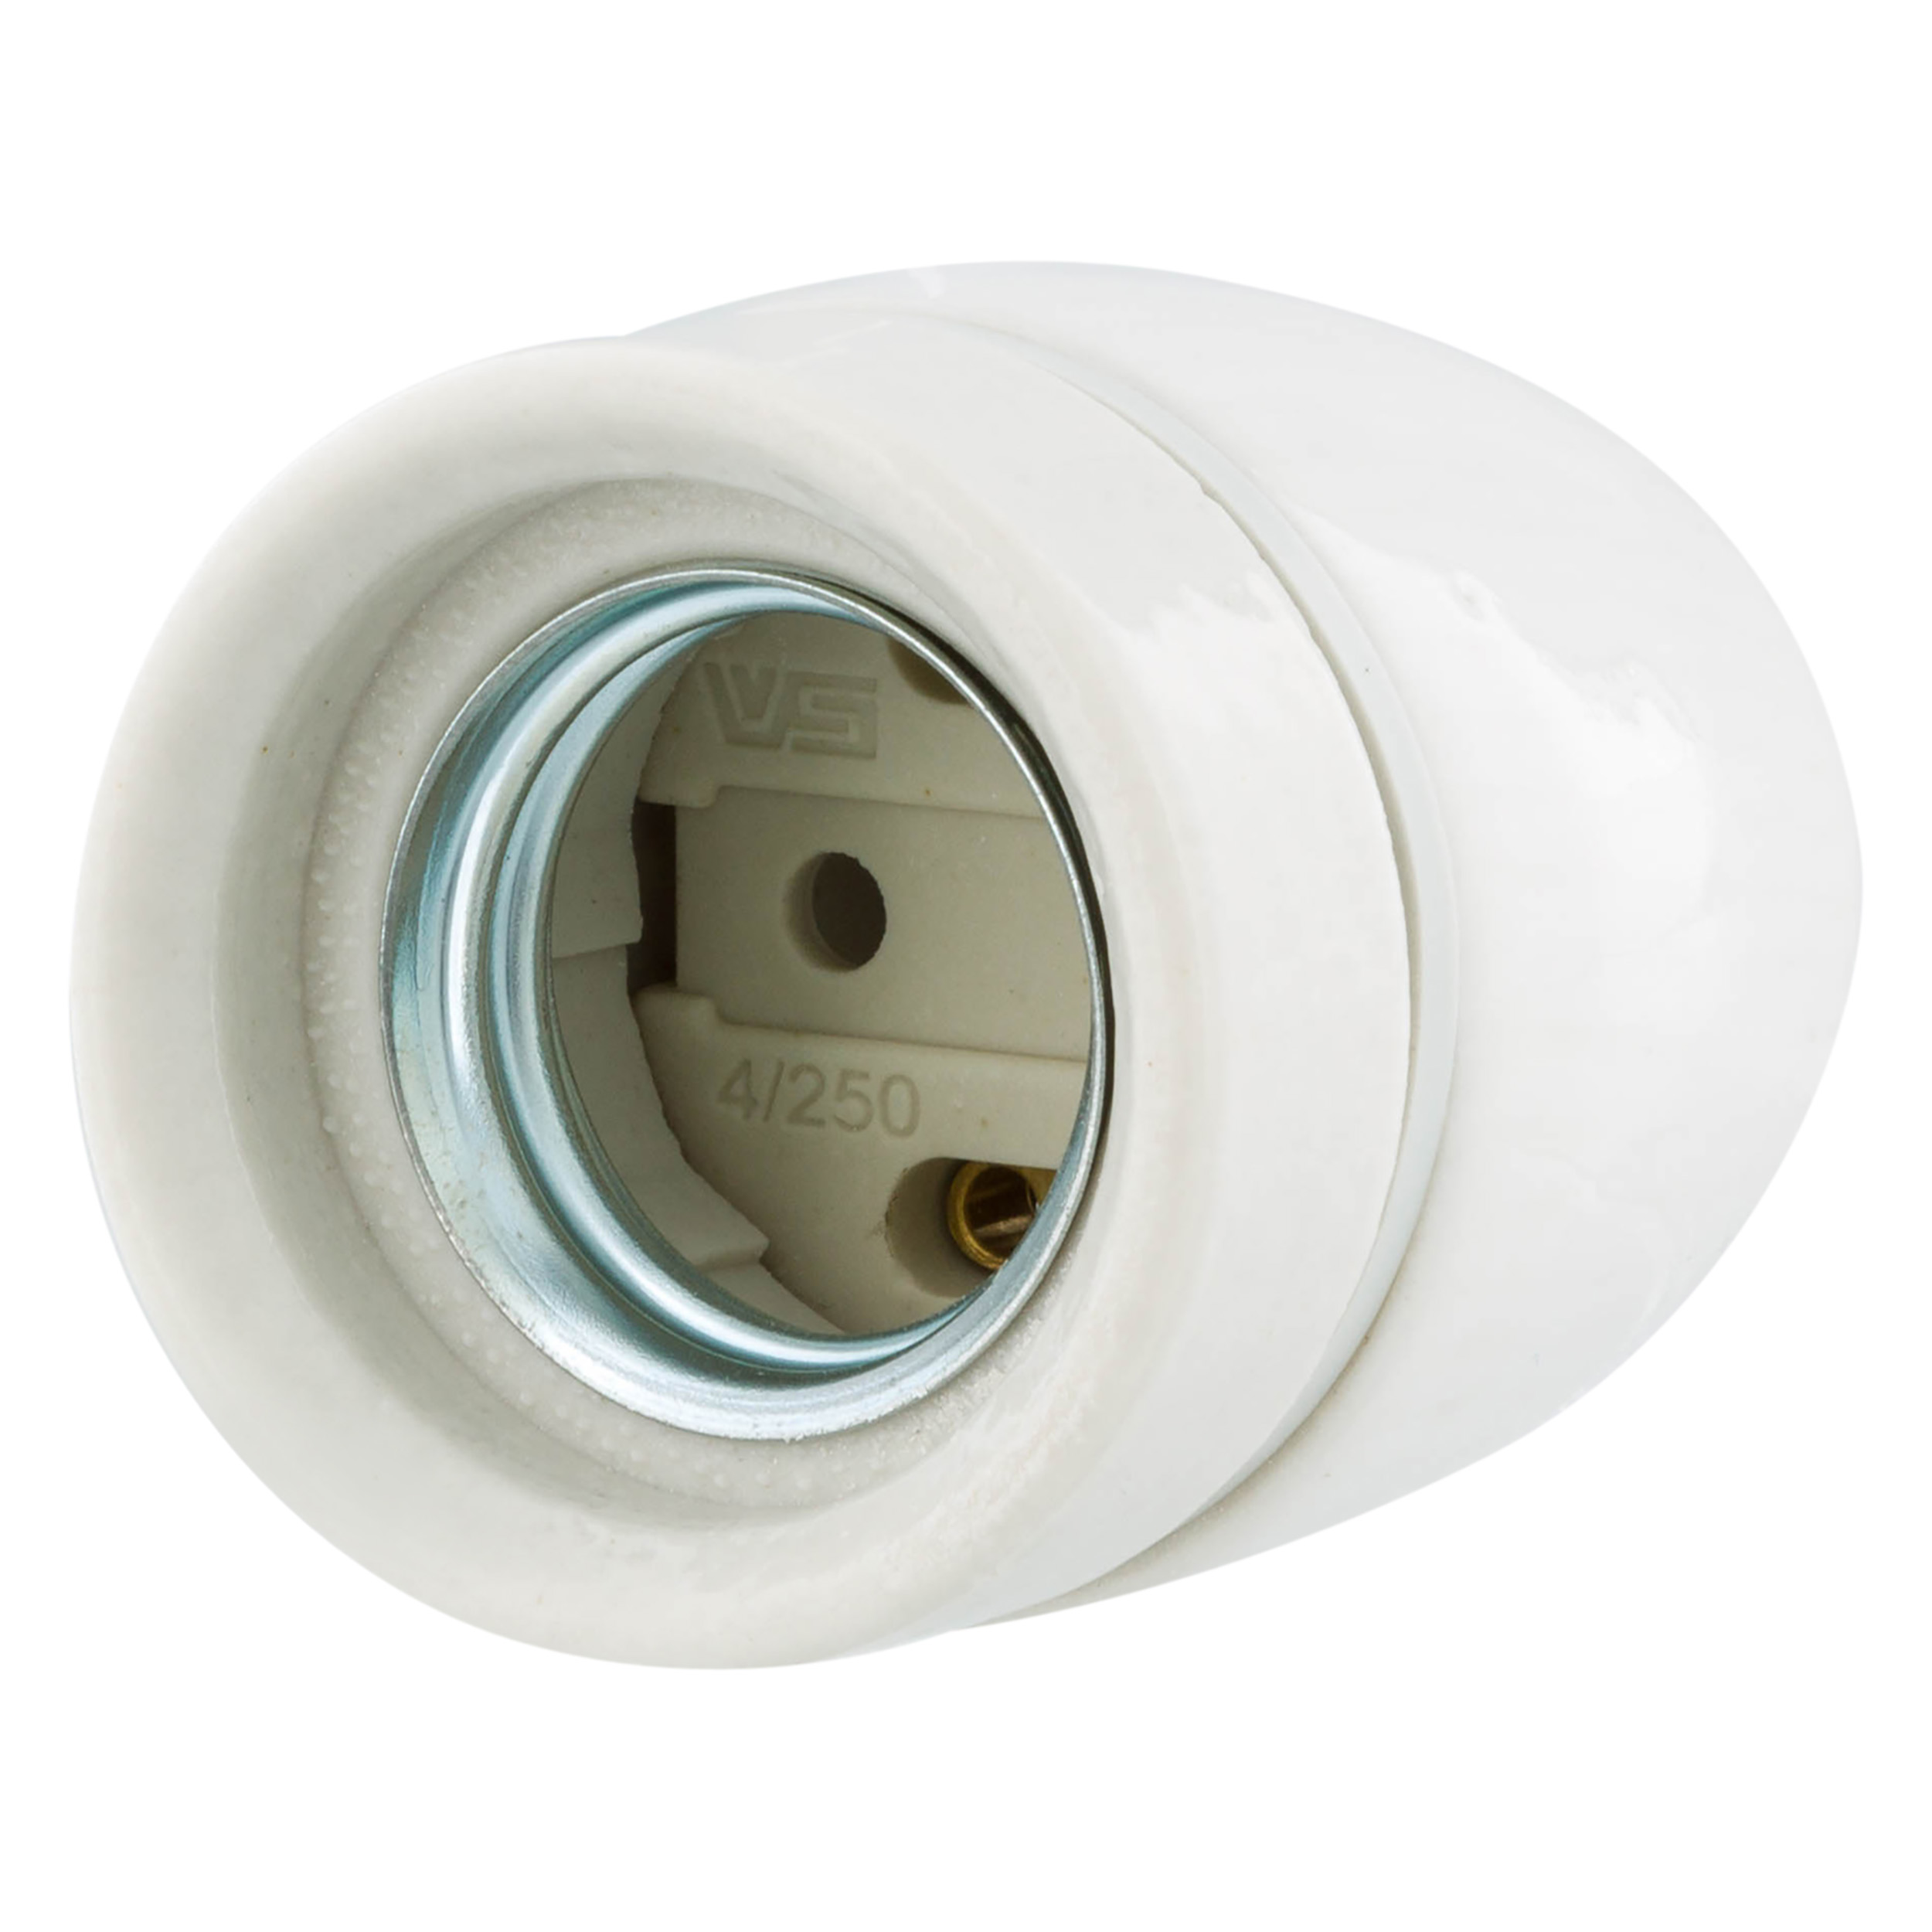 54.211.86 Q-Link  fitting E27 - hittebestendig - max 100W - wit